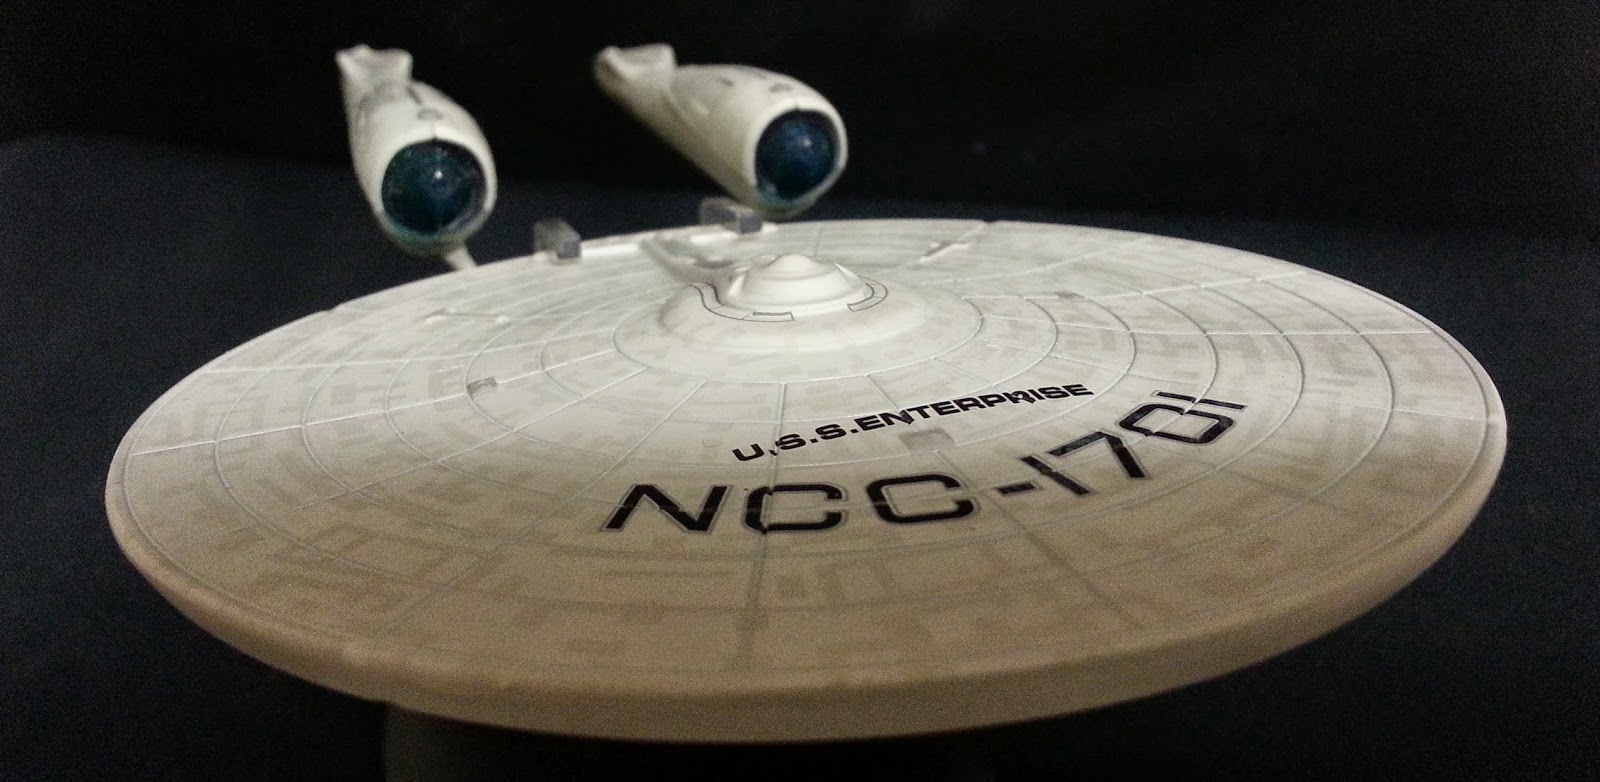 Some Kind of Star Trek: May 2014